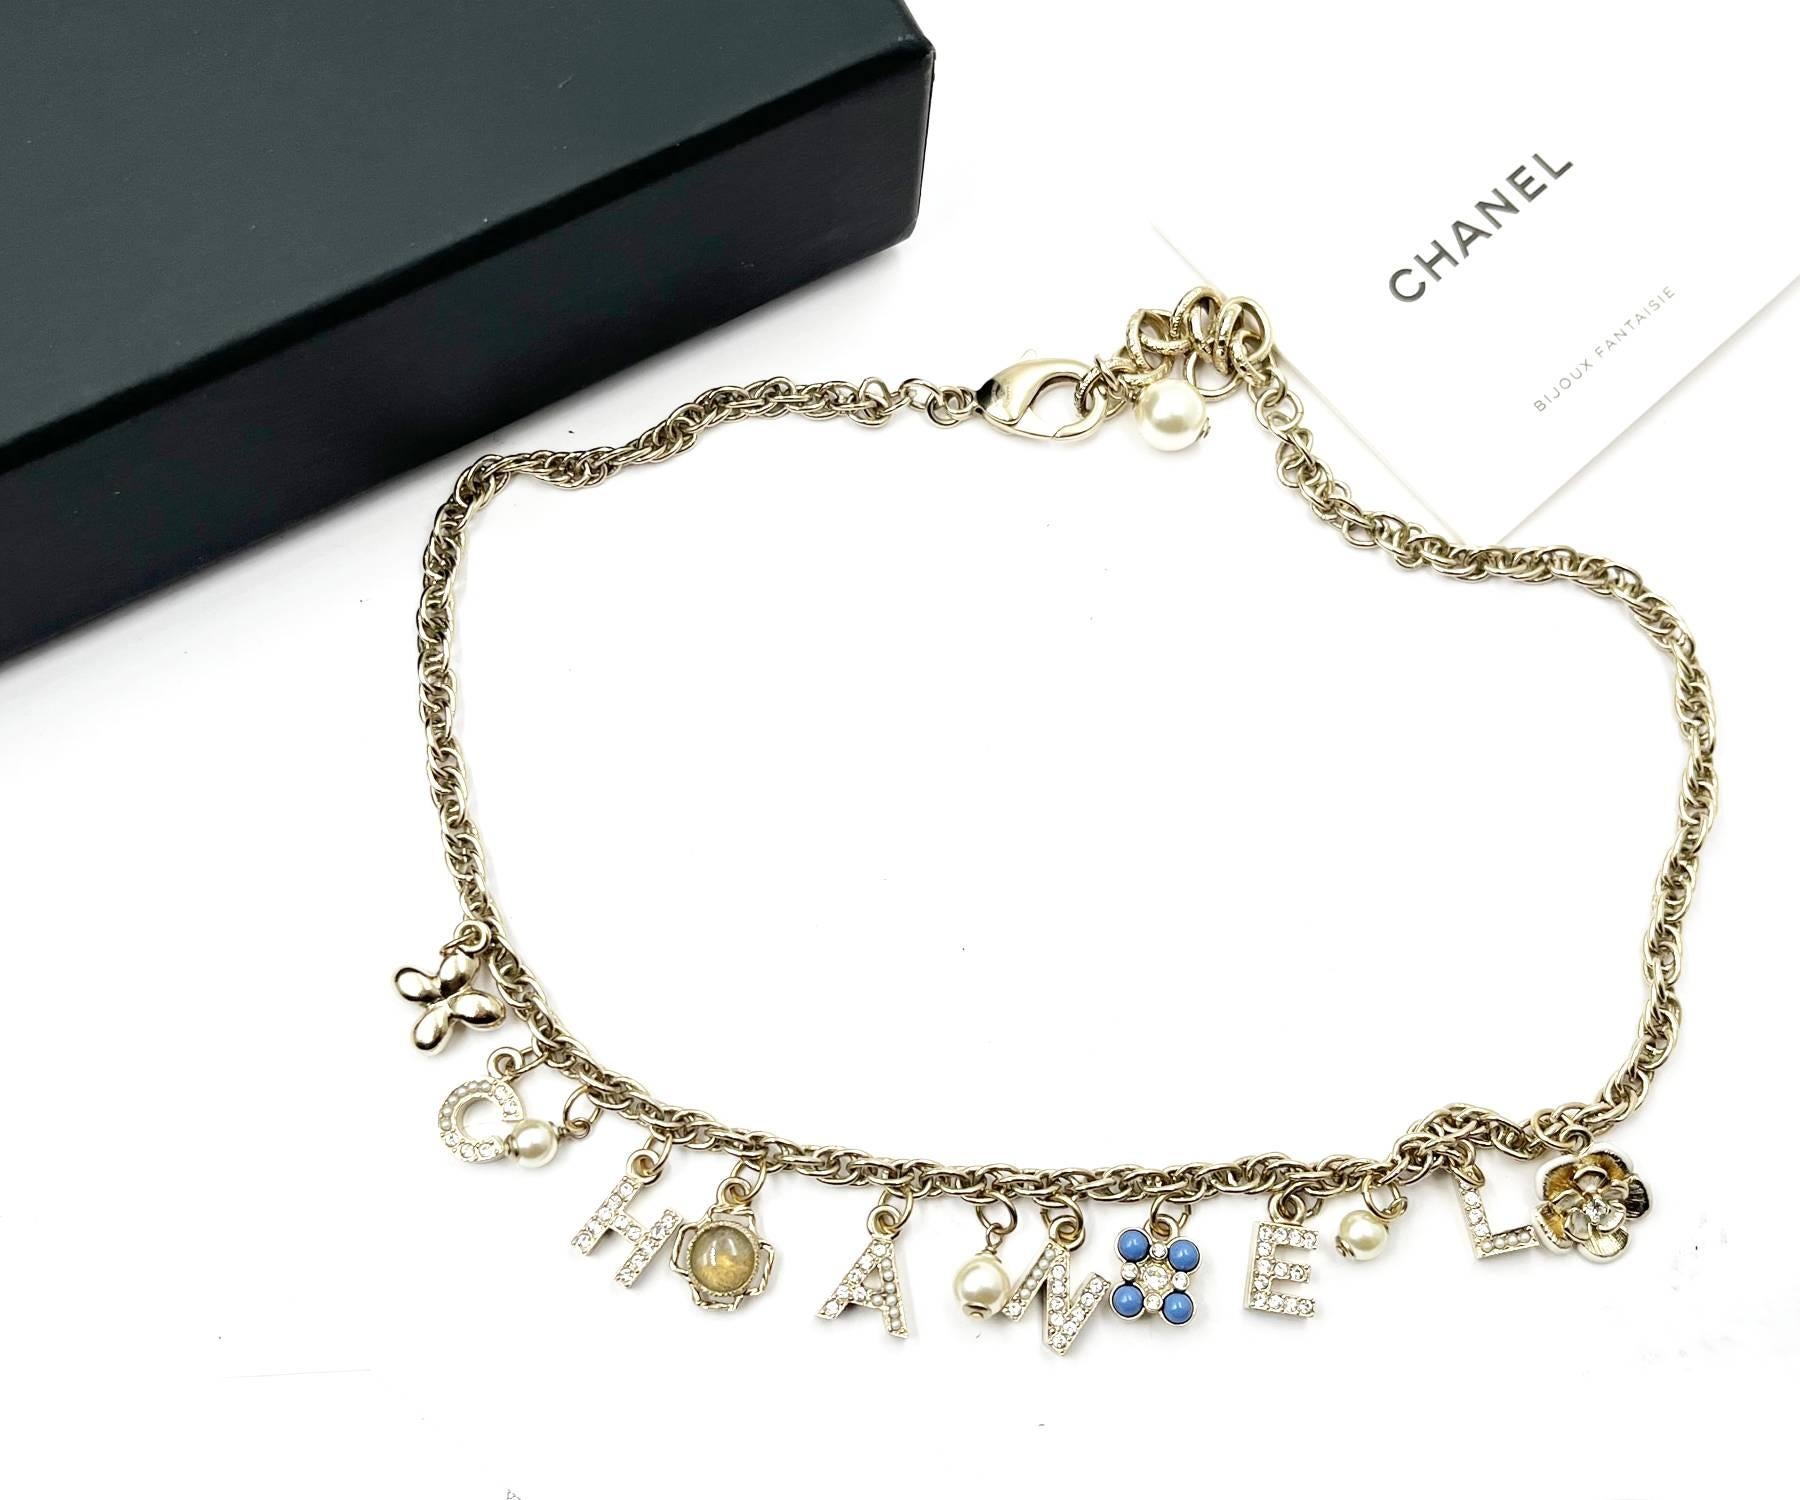 Chanel Gold Letter Crystal Flower Pendants Chain Necklace

* Marked 19
* Made in France
*Comes with the original box, pouch and booklet

-The pendants are approximately 0.5″ x 0.5″.
-The chain is approximately 15.5″ to 18″.
-In a pristine